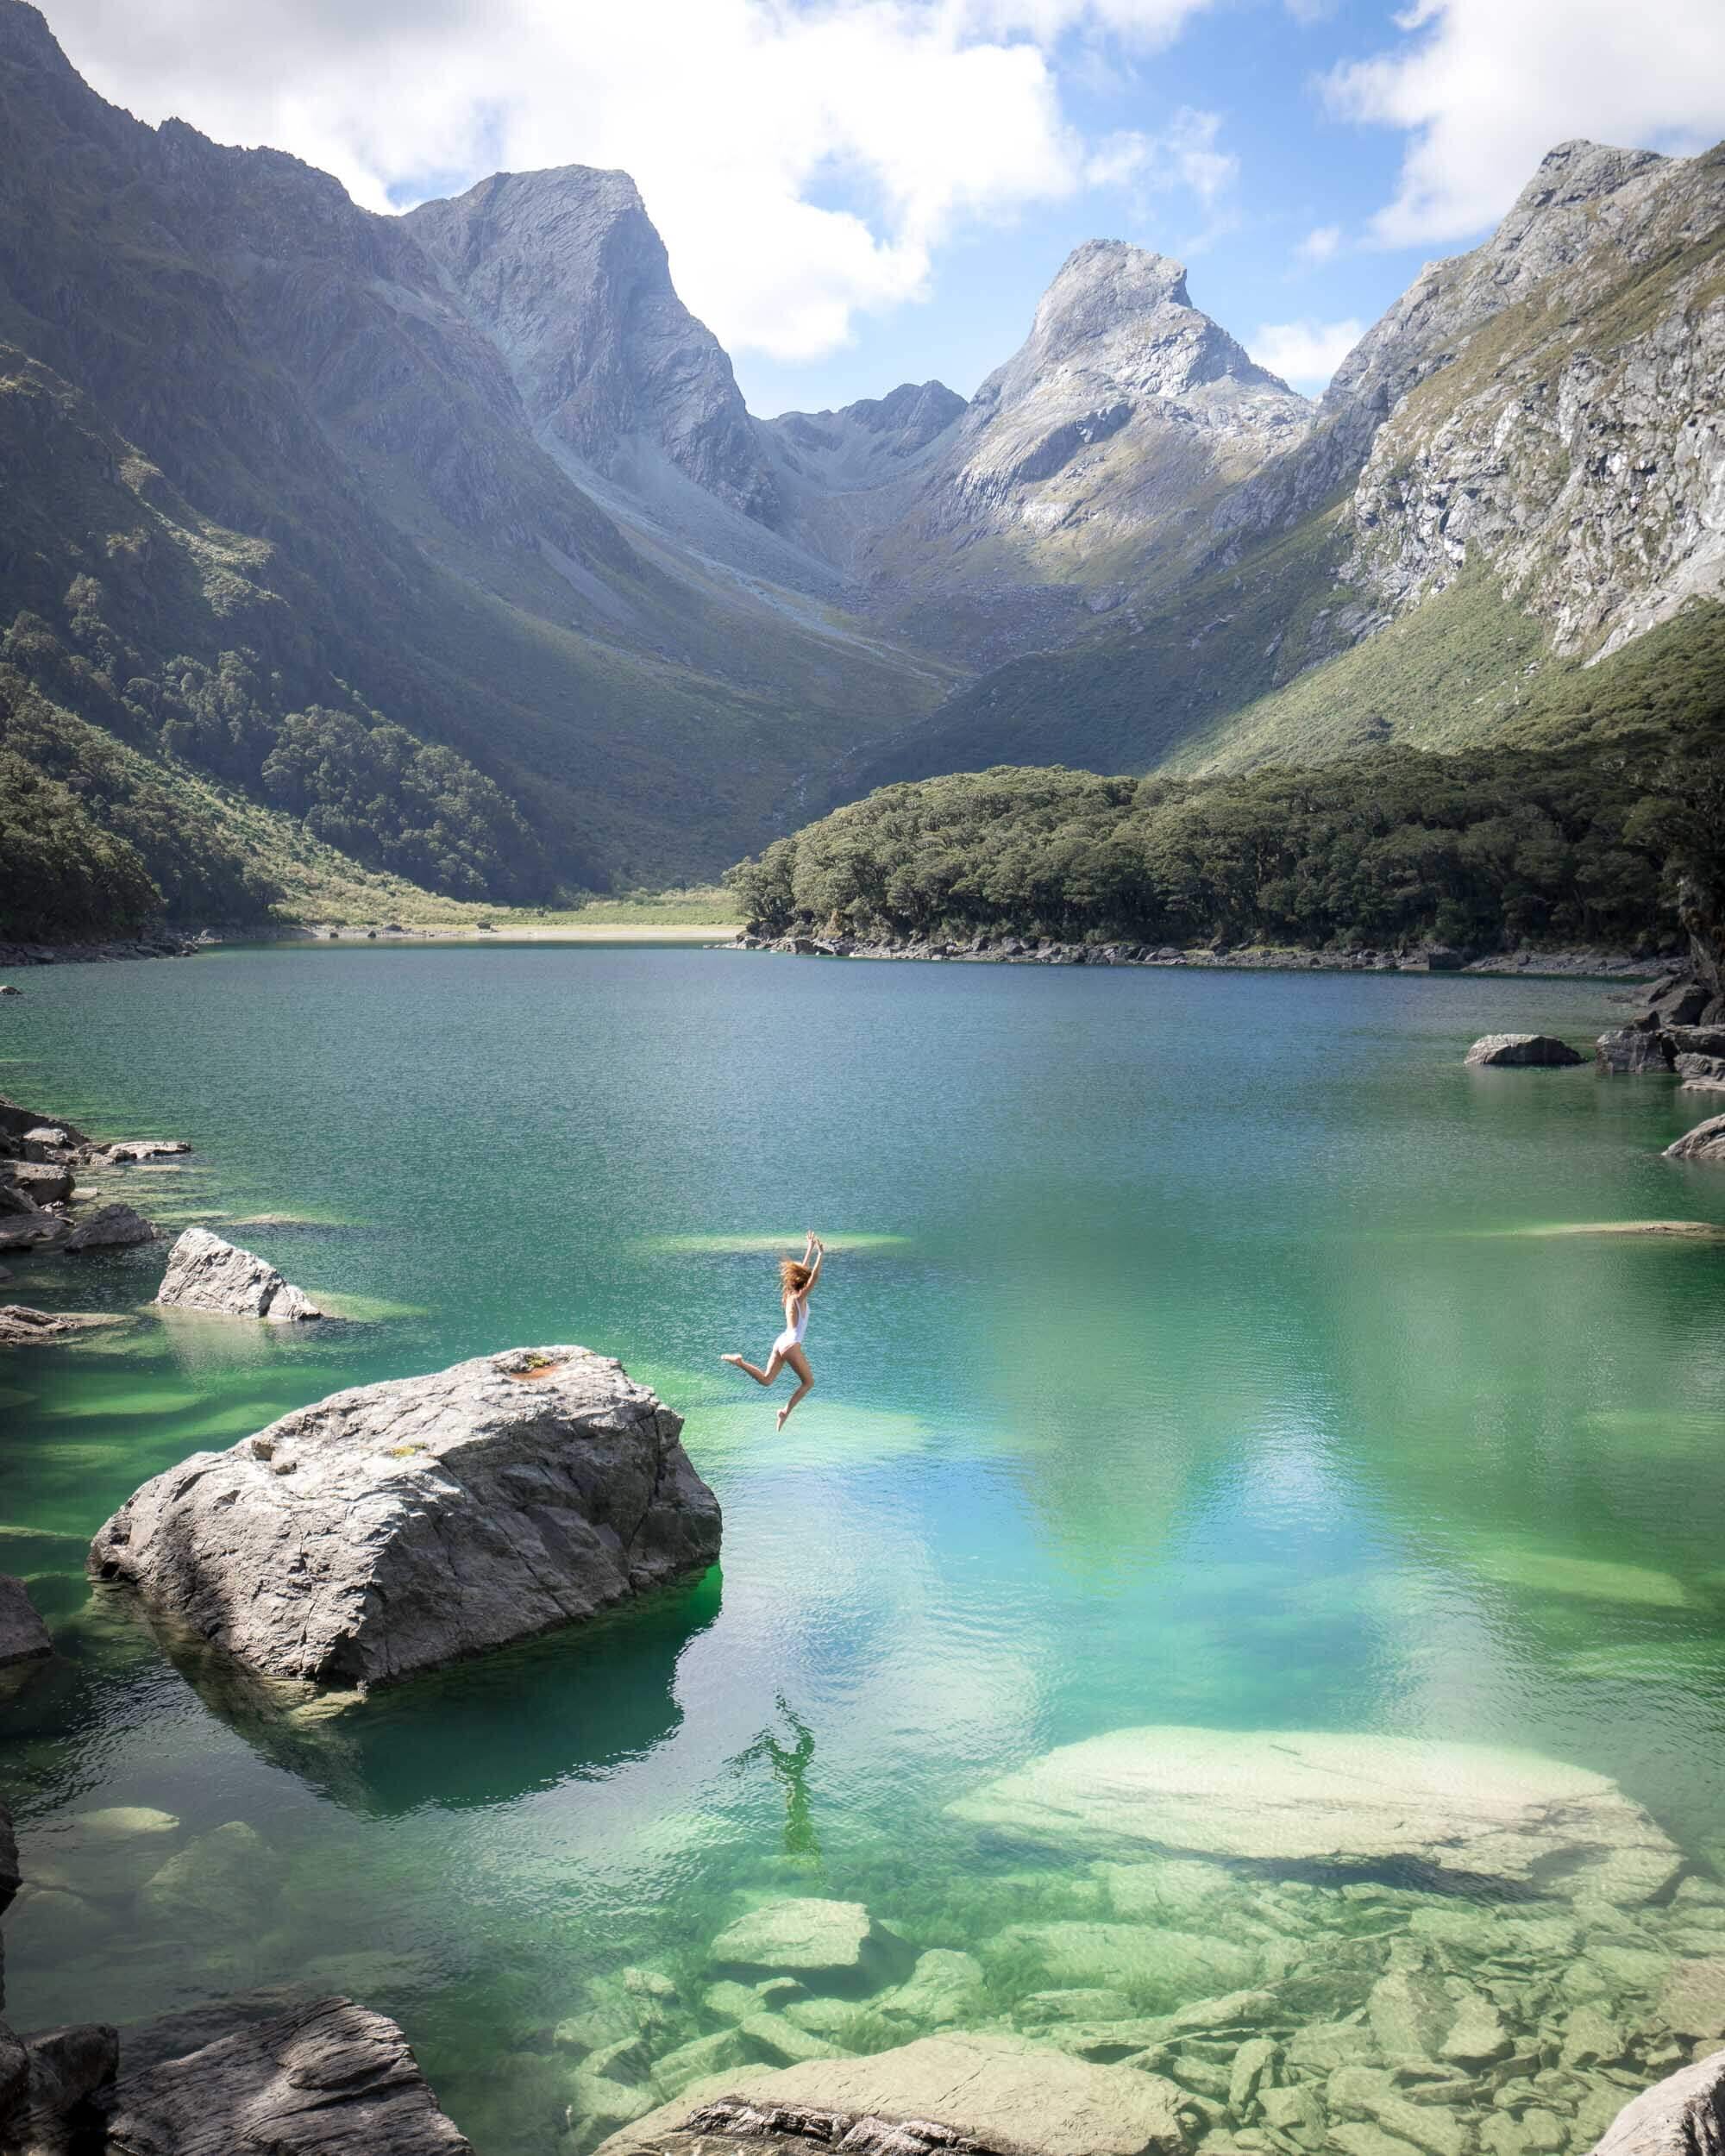 Lake Mackenzie is part of the famous Routeburn Track in New Zealand.